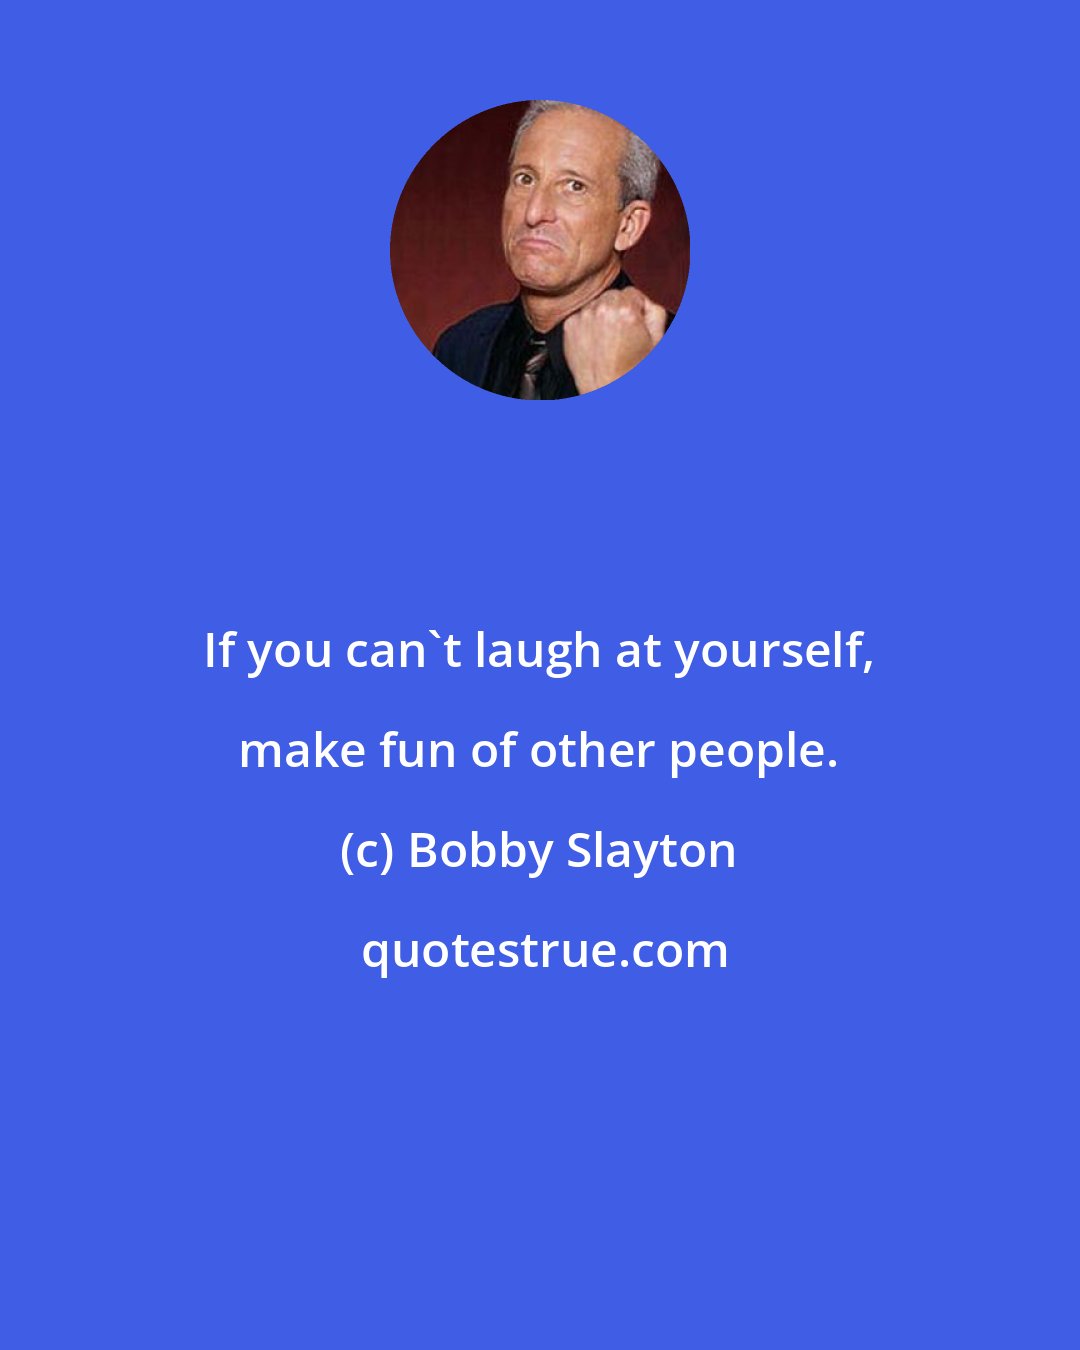 Bobby Slayton: If you can't laugh at yourself, make fun of other people.